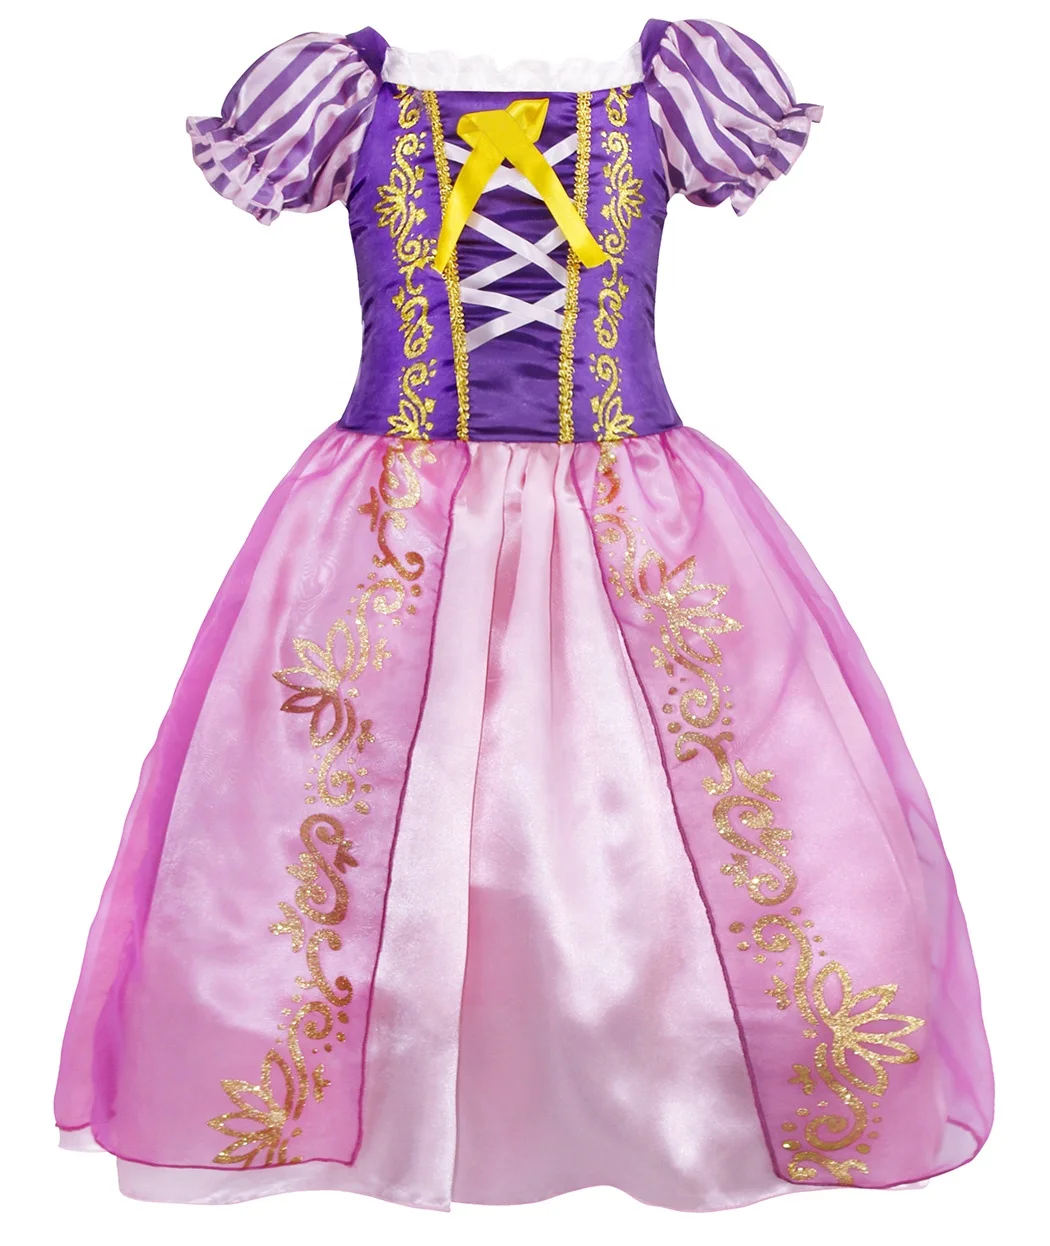 Kids Princess Dress Up For Girls Embroidered Cosplay Costume Party Clothing 